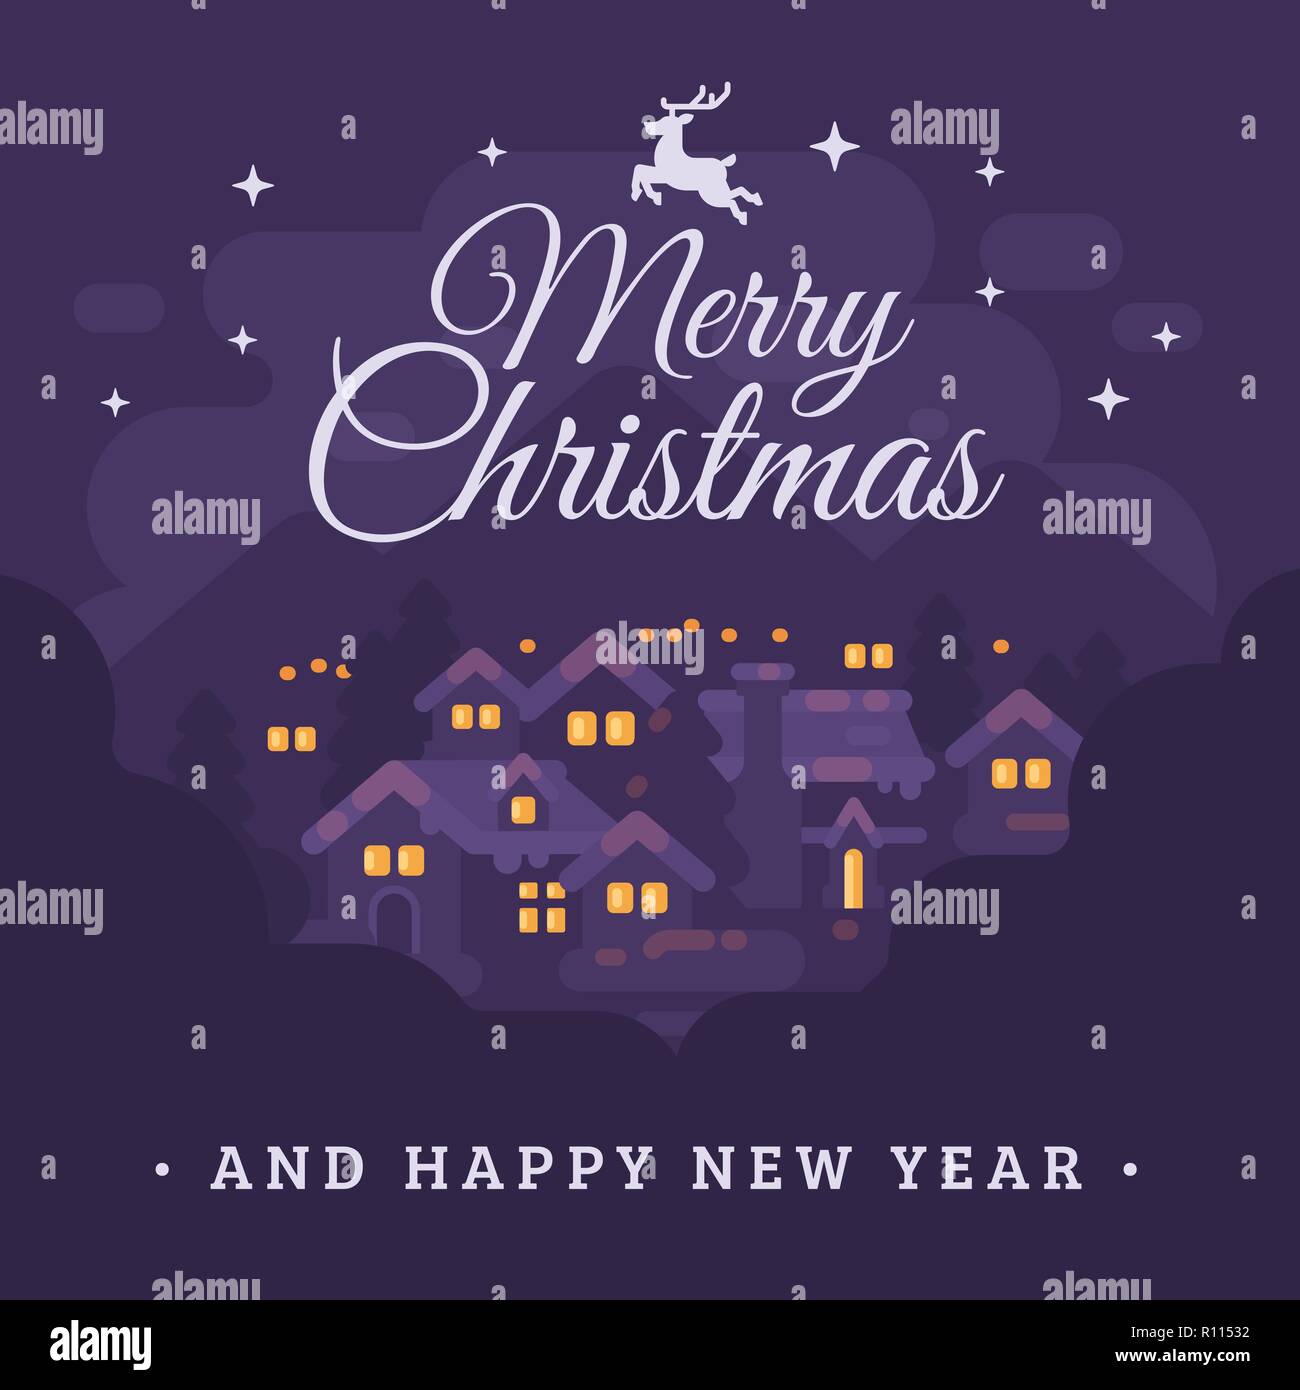 Merry Christmas and Happy New Year greeting card with night mountain village landscape flat illustration Stock Vector